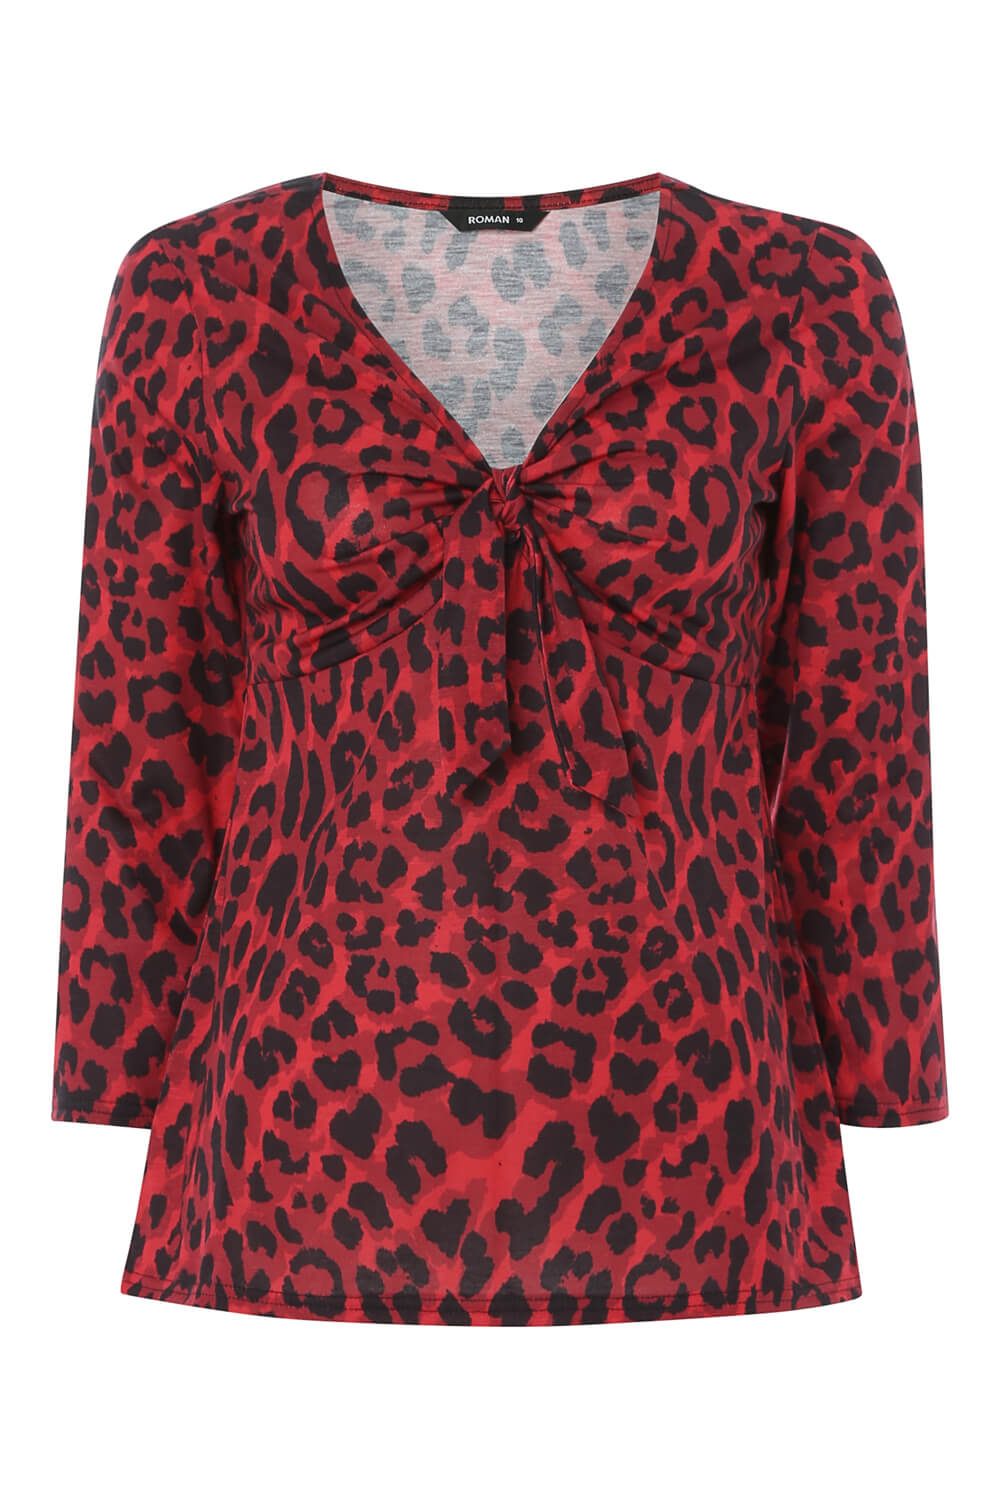 Red Leopard Print Tie Front Top, Image 4 of 4